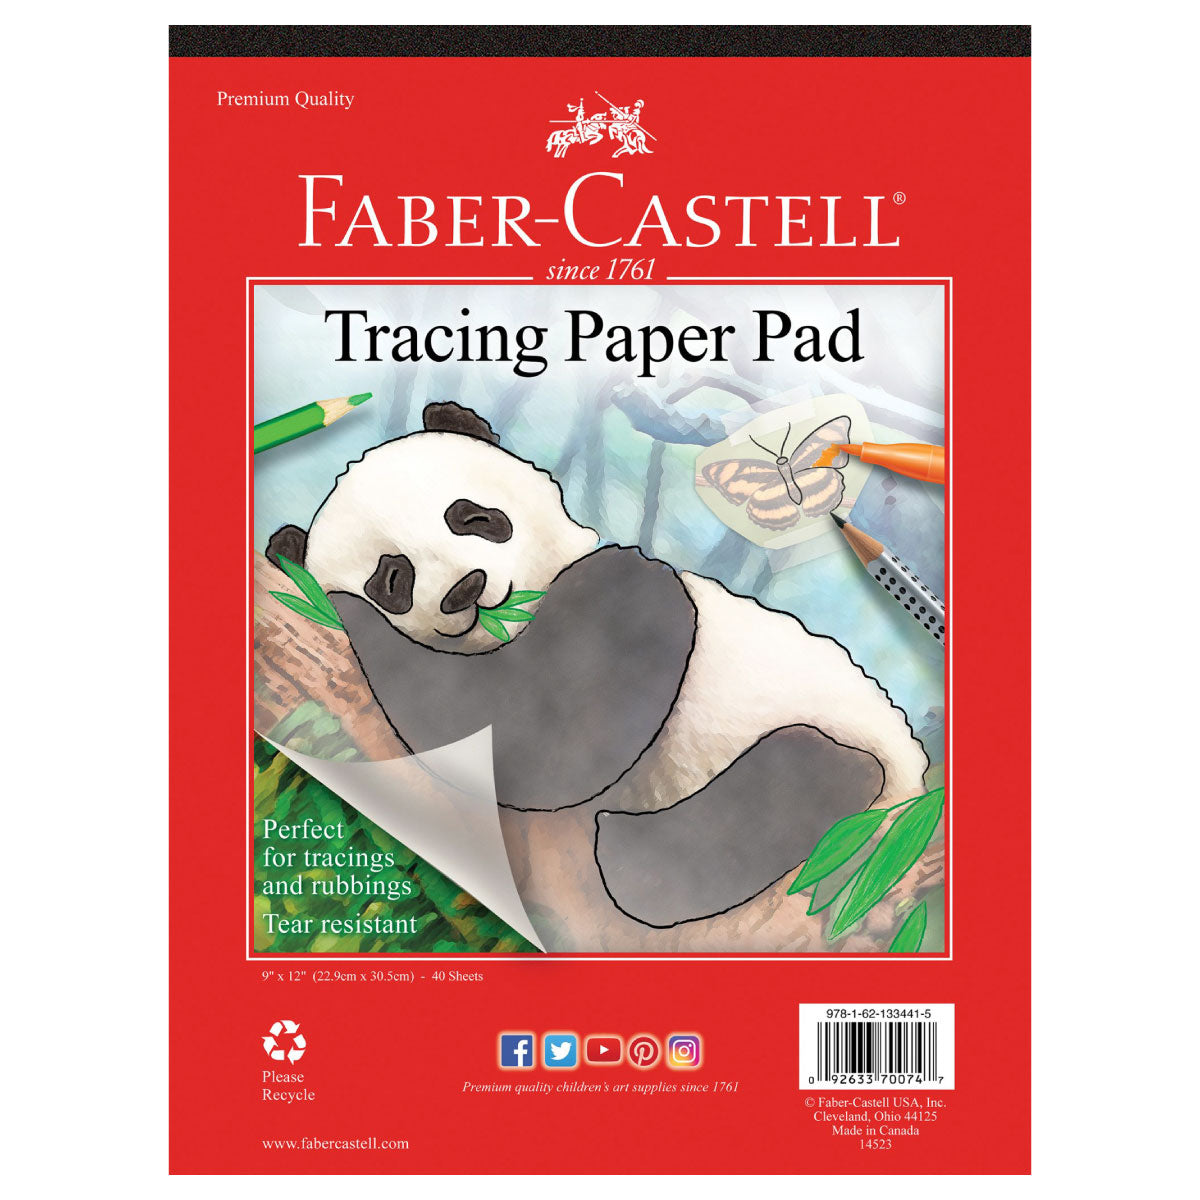 Faber-Castell Tracing Paper Pad - 9x12